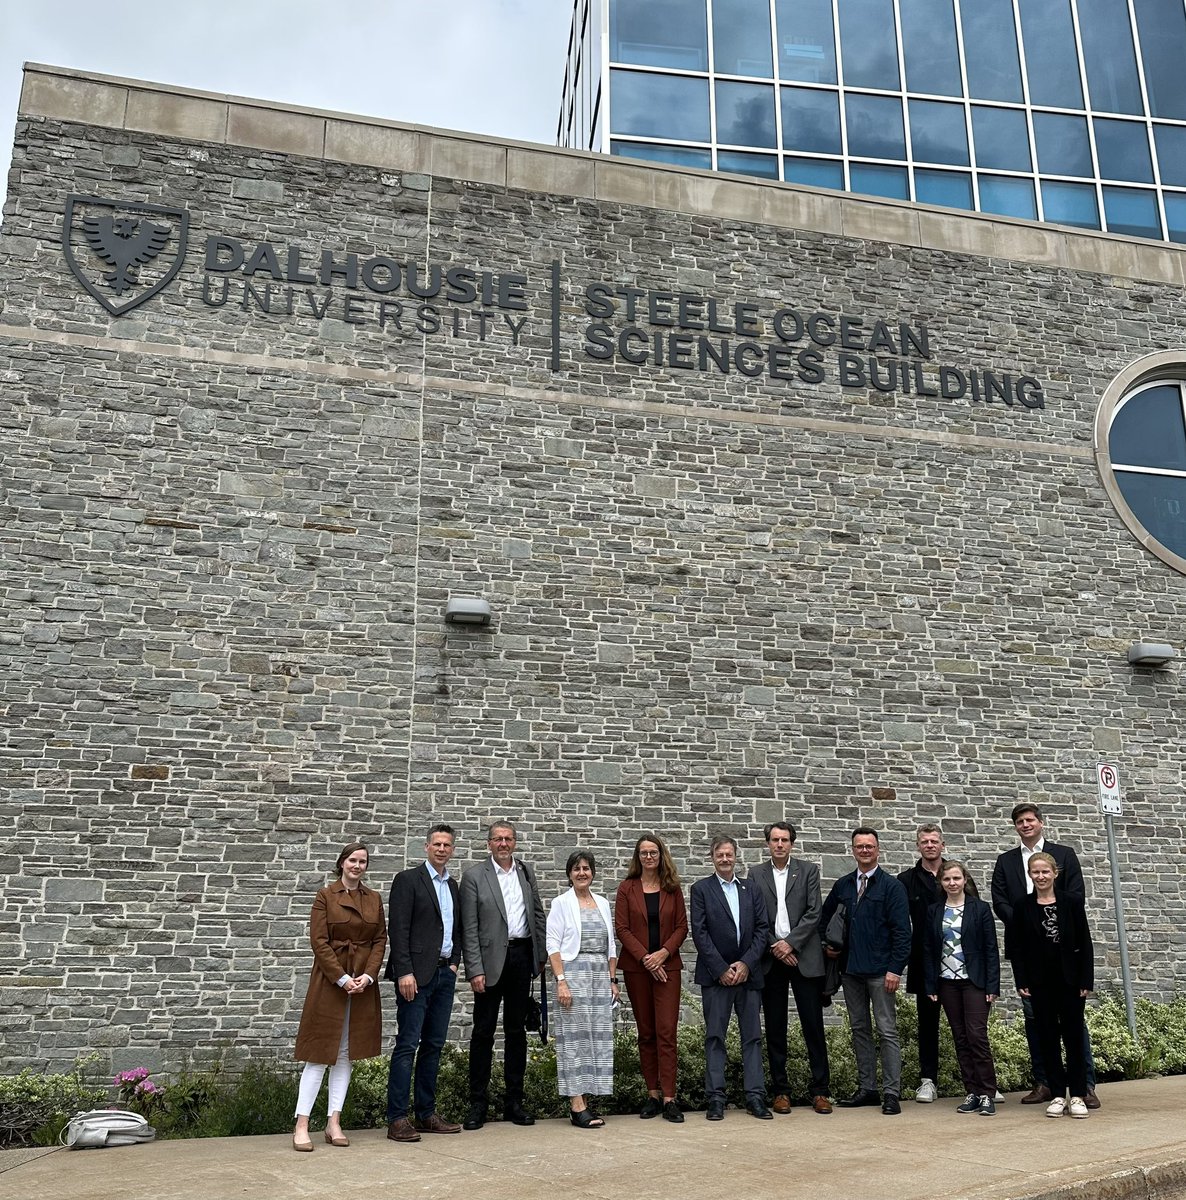 Thanks to @AnyaWaite for introducing @OceanFrontier Institute impressive mission to tackle climate challenges while integrating peoples perspectives. #MV science delegation @DalhousieU @BettinaMartin4 @Ostseeforschung